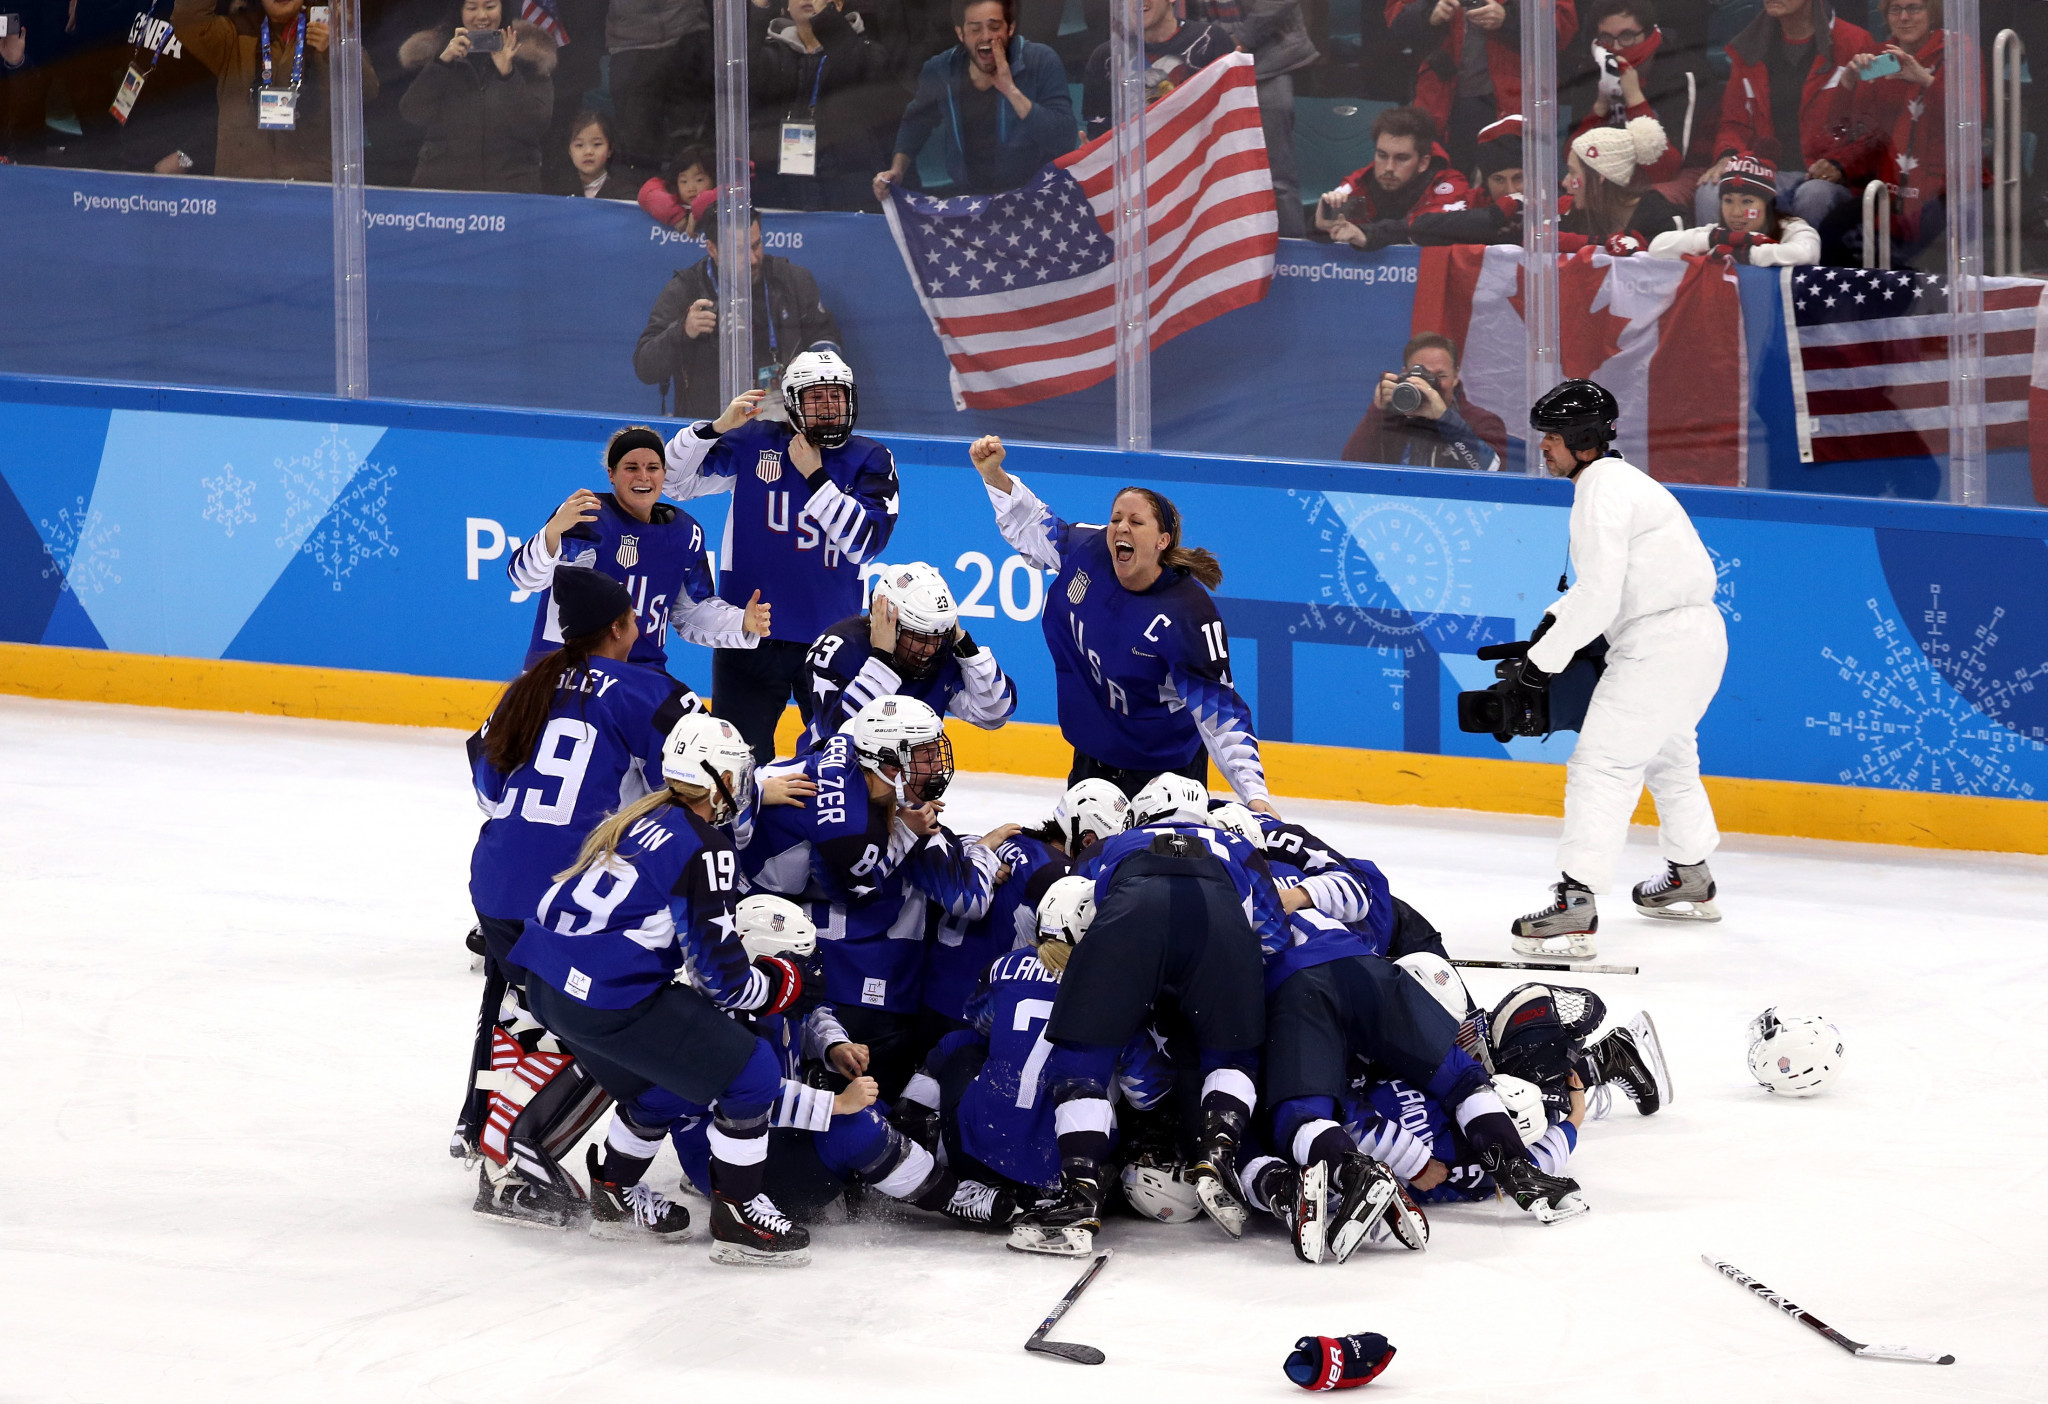 The US women's team won only their second ice hockey Olympic gold - after winning the inaugural tournament at Nagano 1998 - at Pyeongchang 2018 ©Getty Images